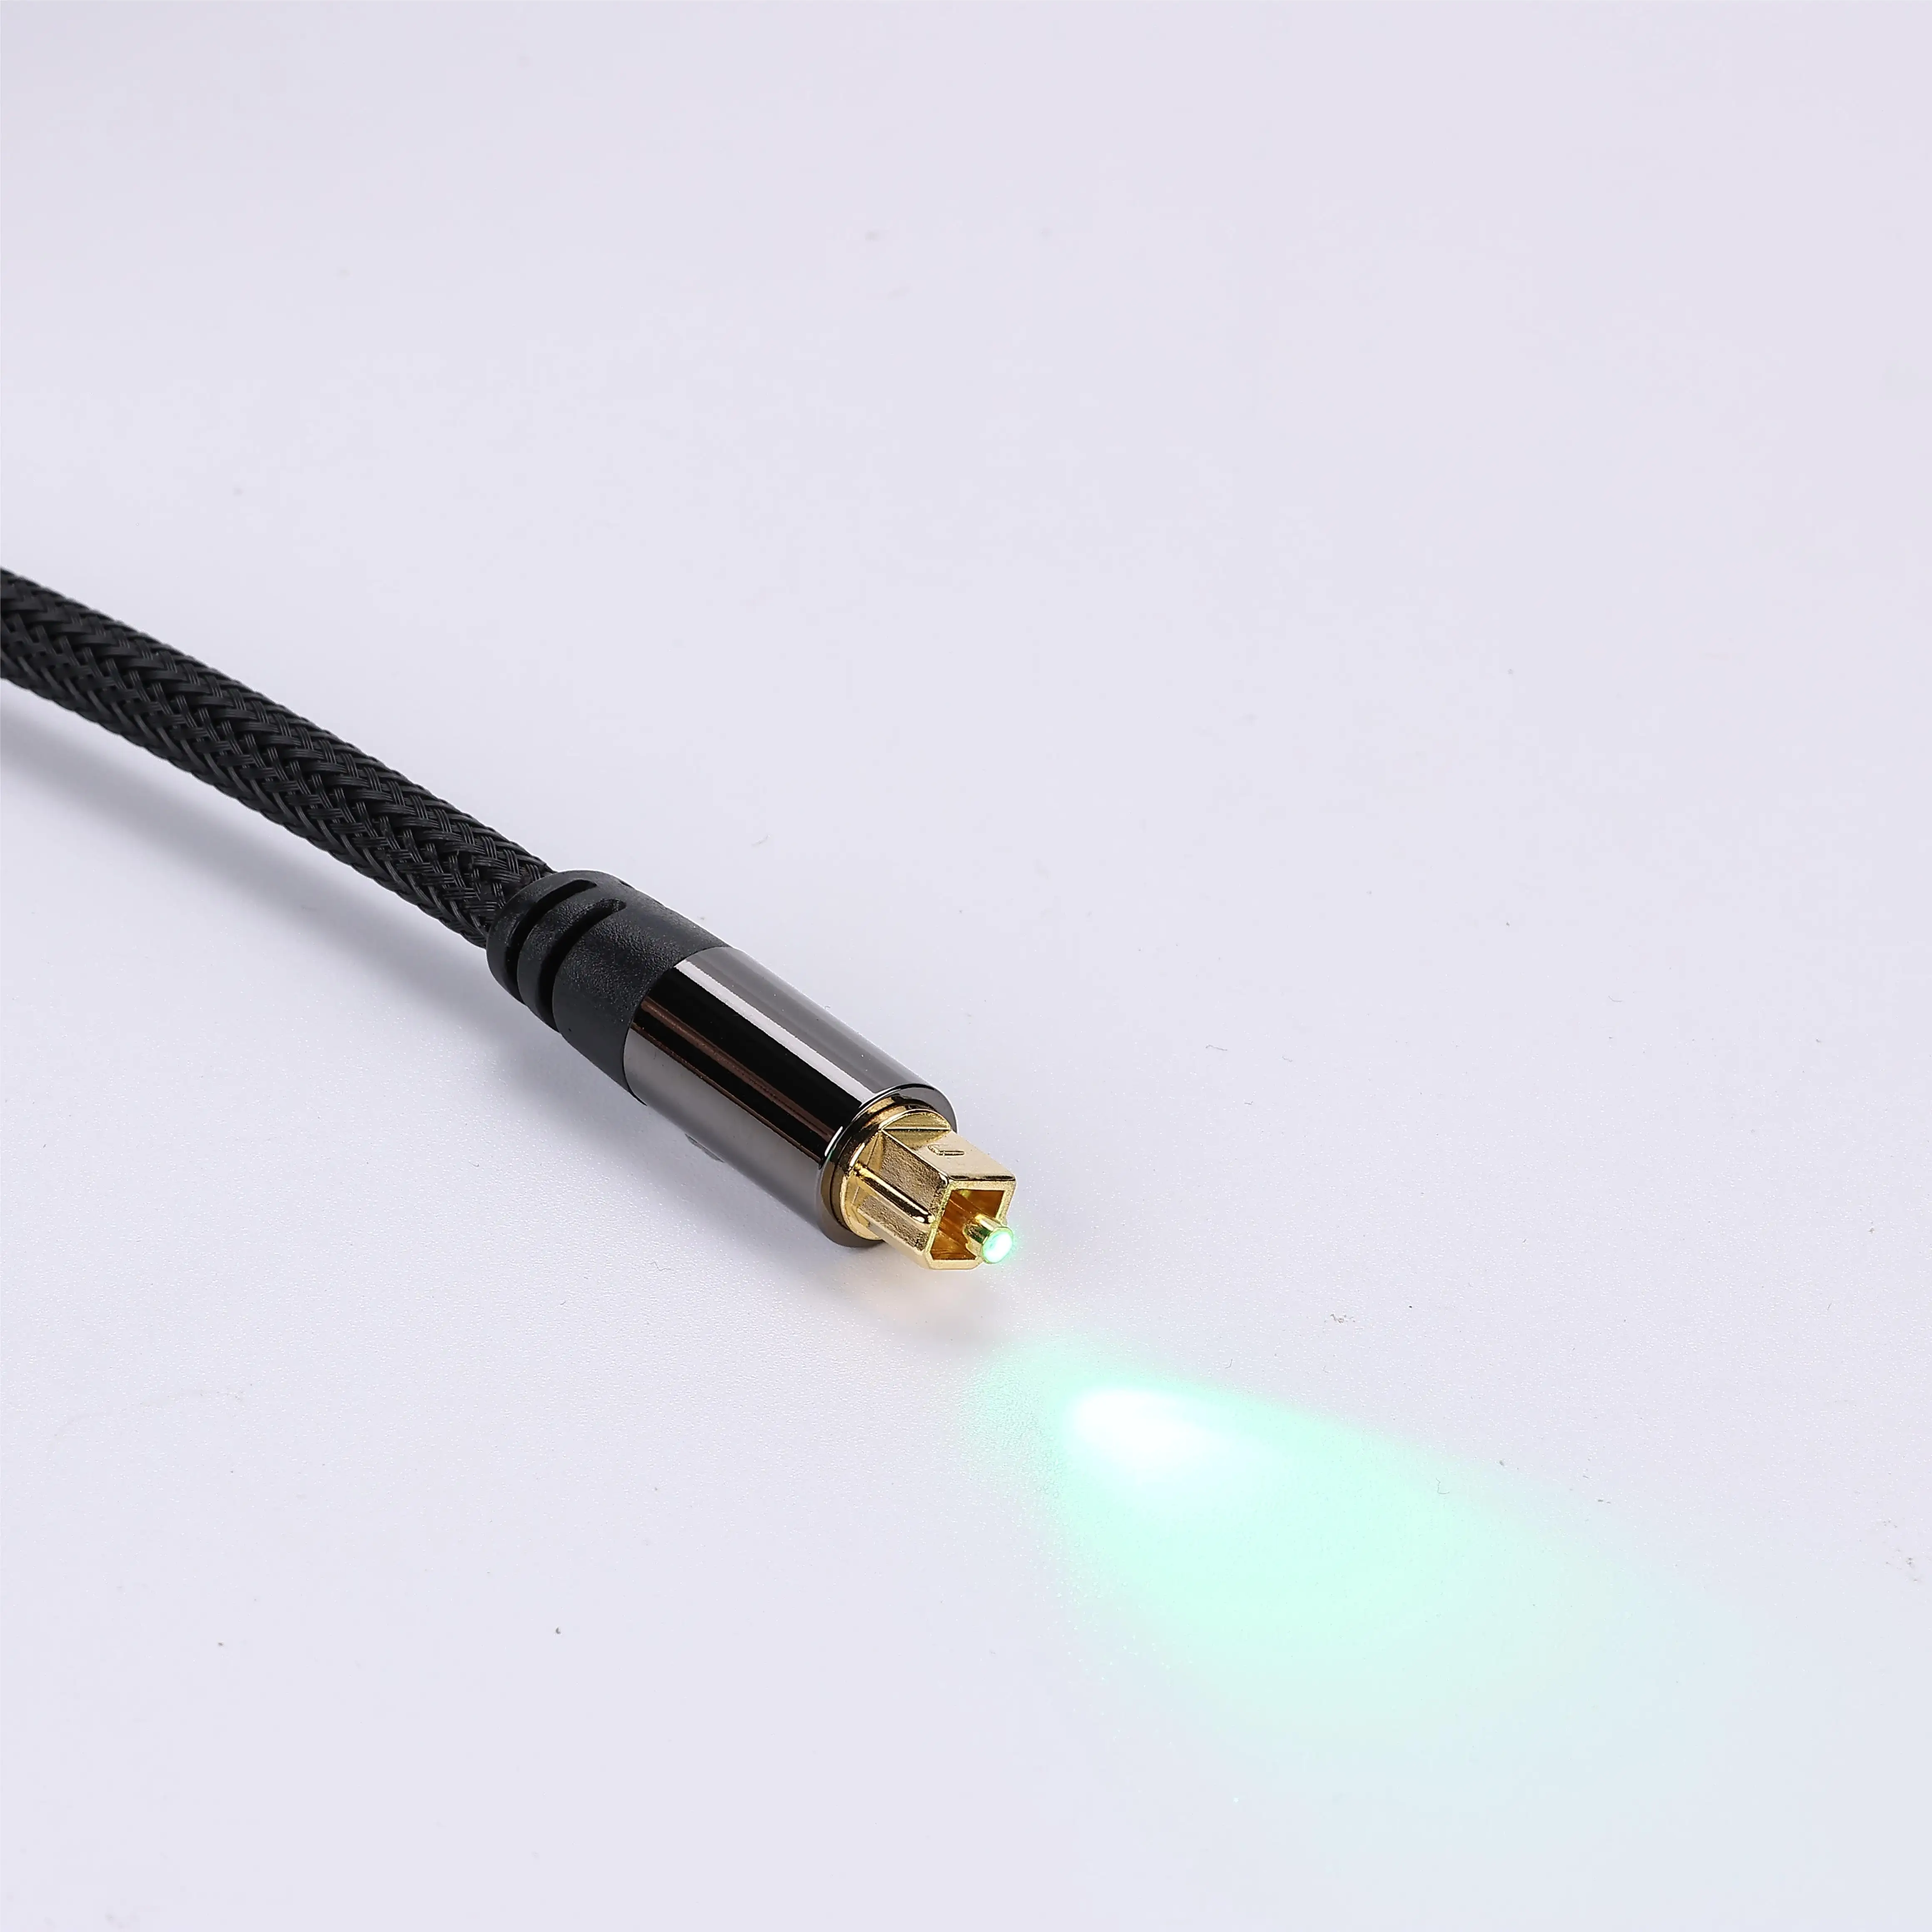 Optical Audio Cable male to male Coaxial Spdif Digital Optical Audio Toslink TX-TM-022 Cable